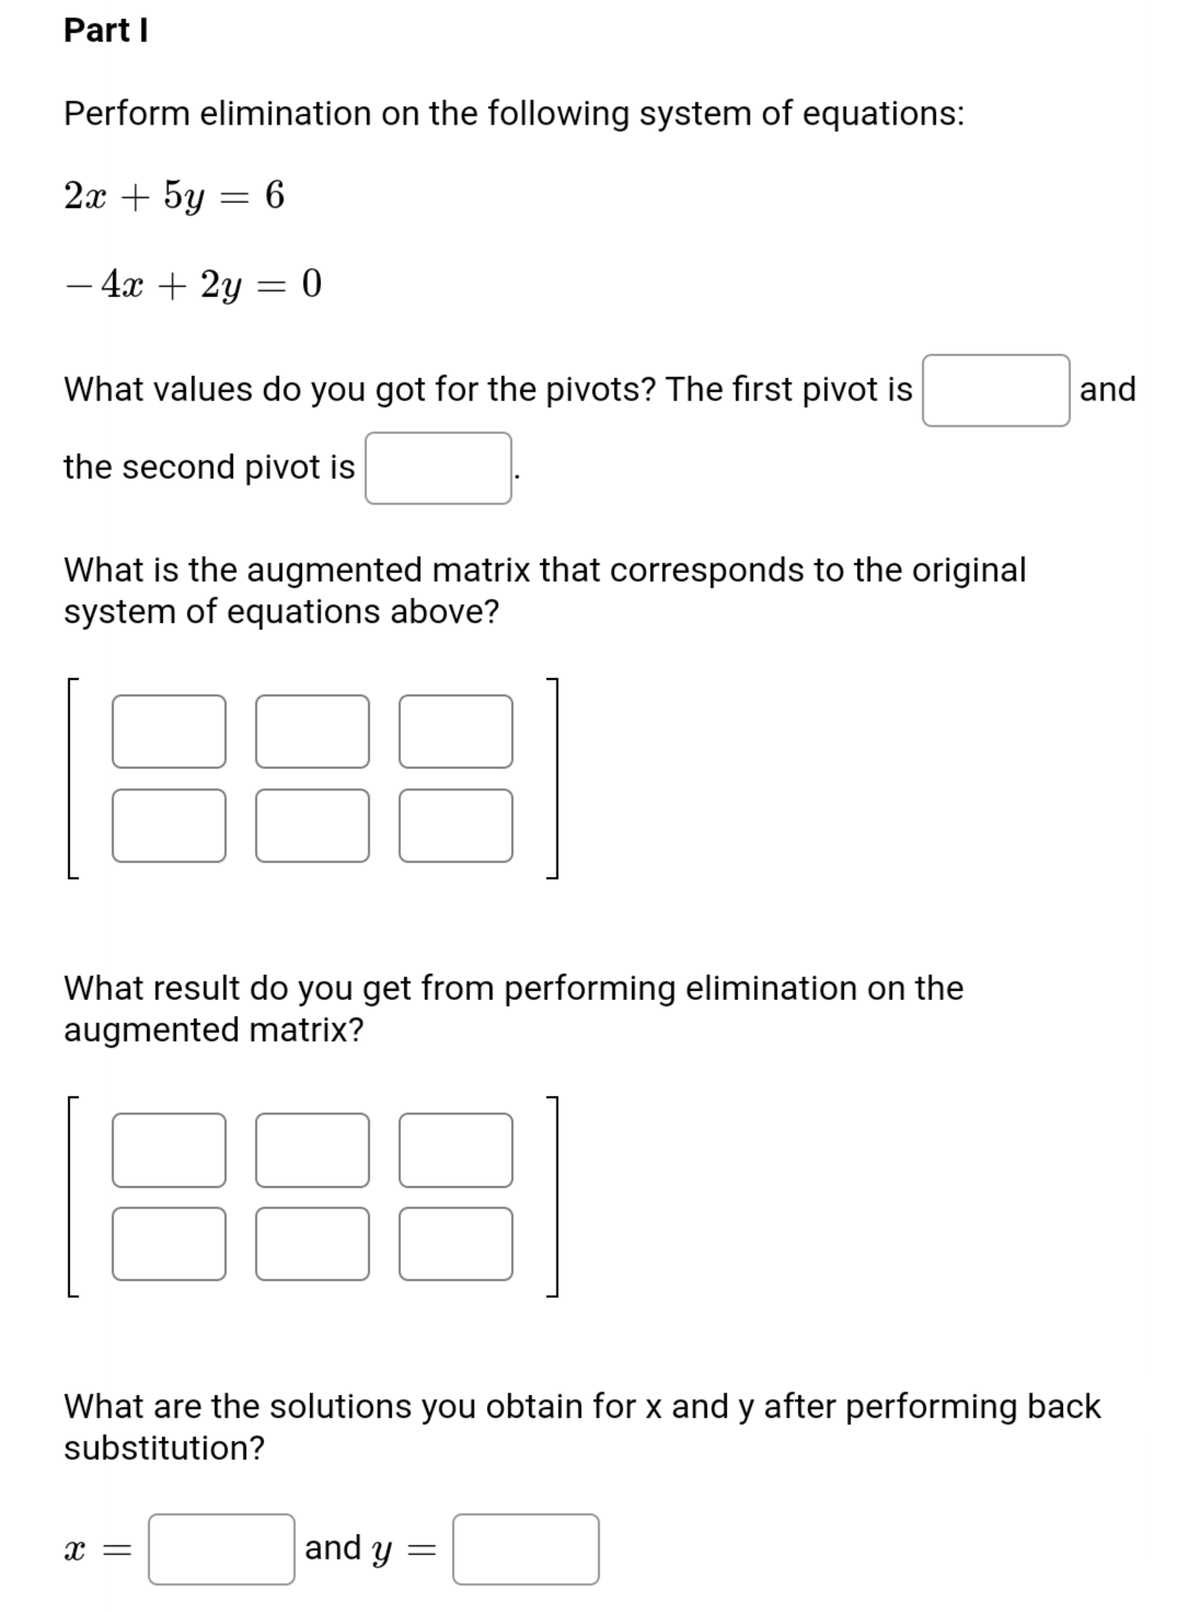 Part I
Perform elimination on the following system of equations:
2х + 5y — 6
- 4x + 2y = 0
-
What values do you got for the pivots? The first pivot is
and
the second pivot is
What is the augmented matrix that corresponds to the original
system of equations above?
What result do you get from performing elimination on the
augmented matrix?
What are the solutions you obtain for x and y after performing back
substitution?
x =
and y =
